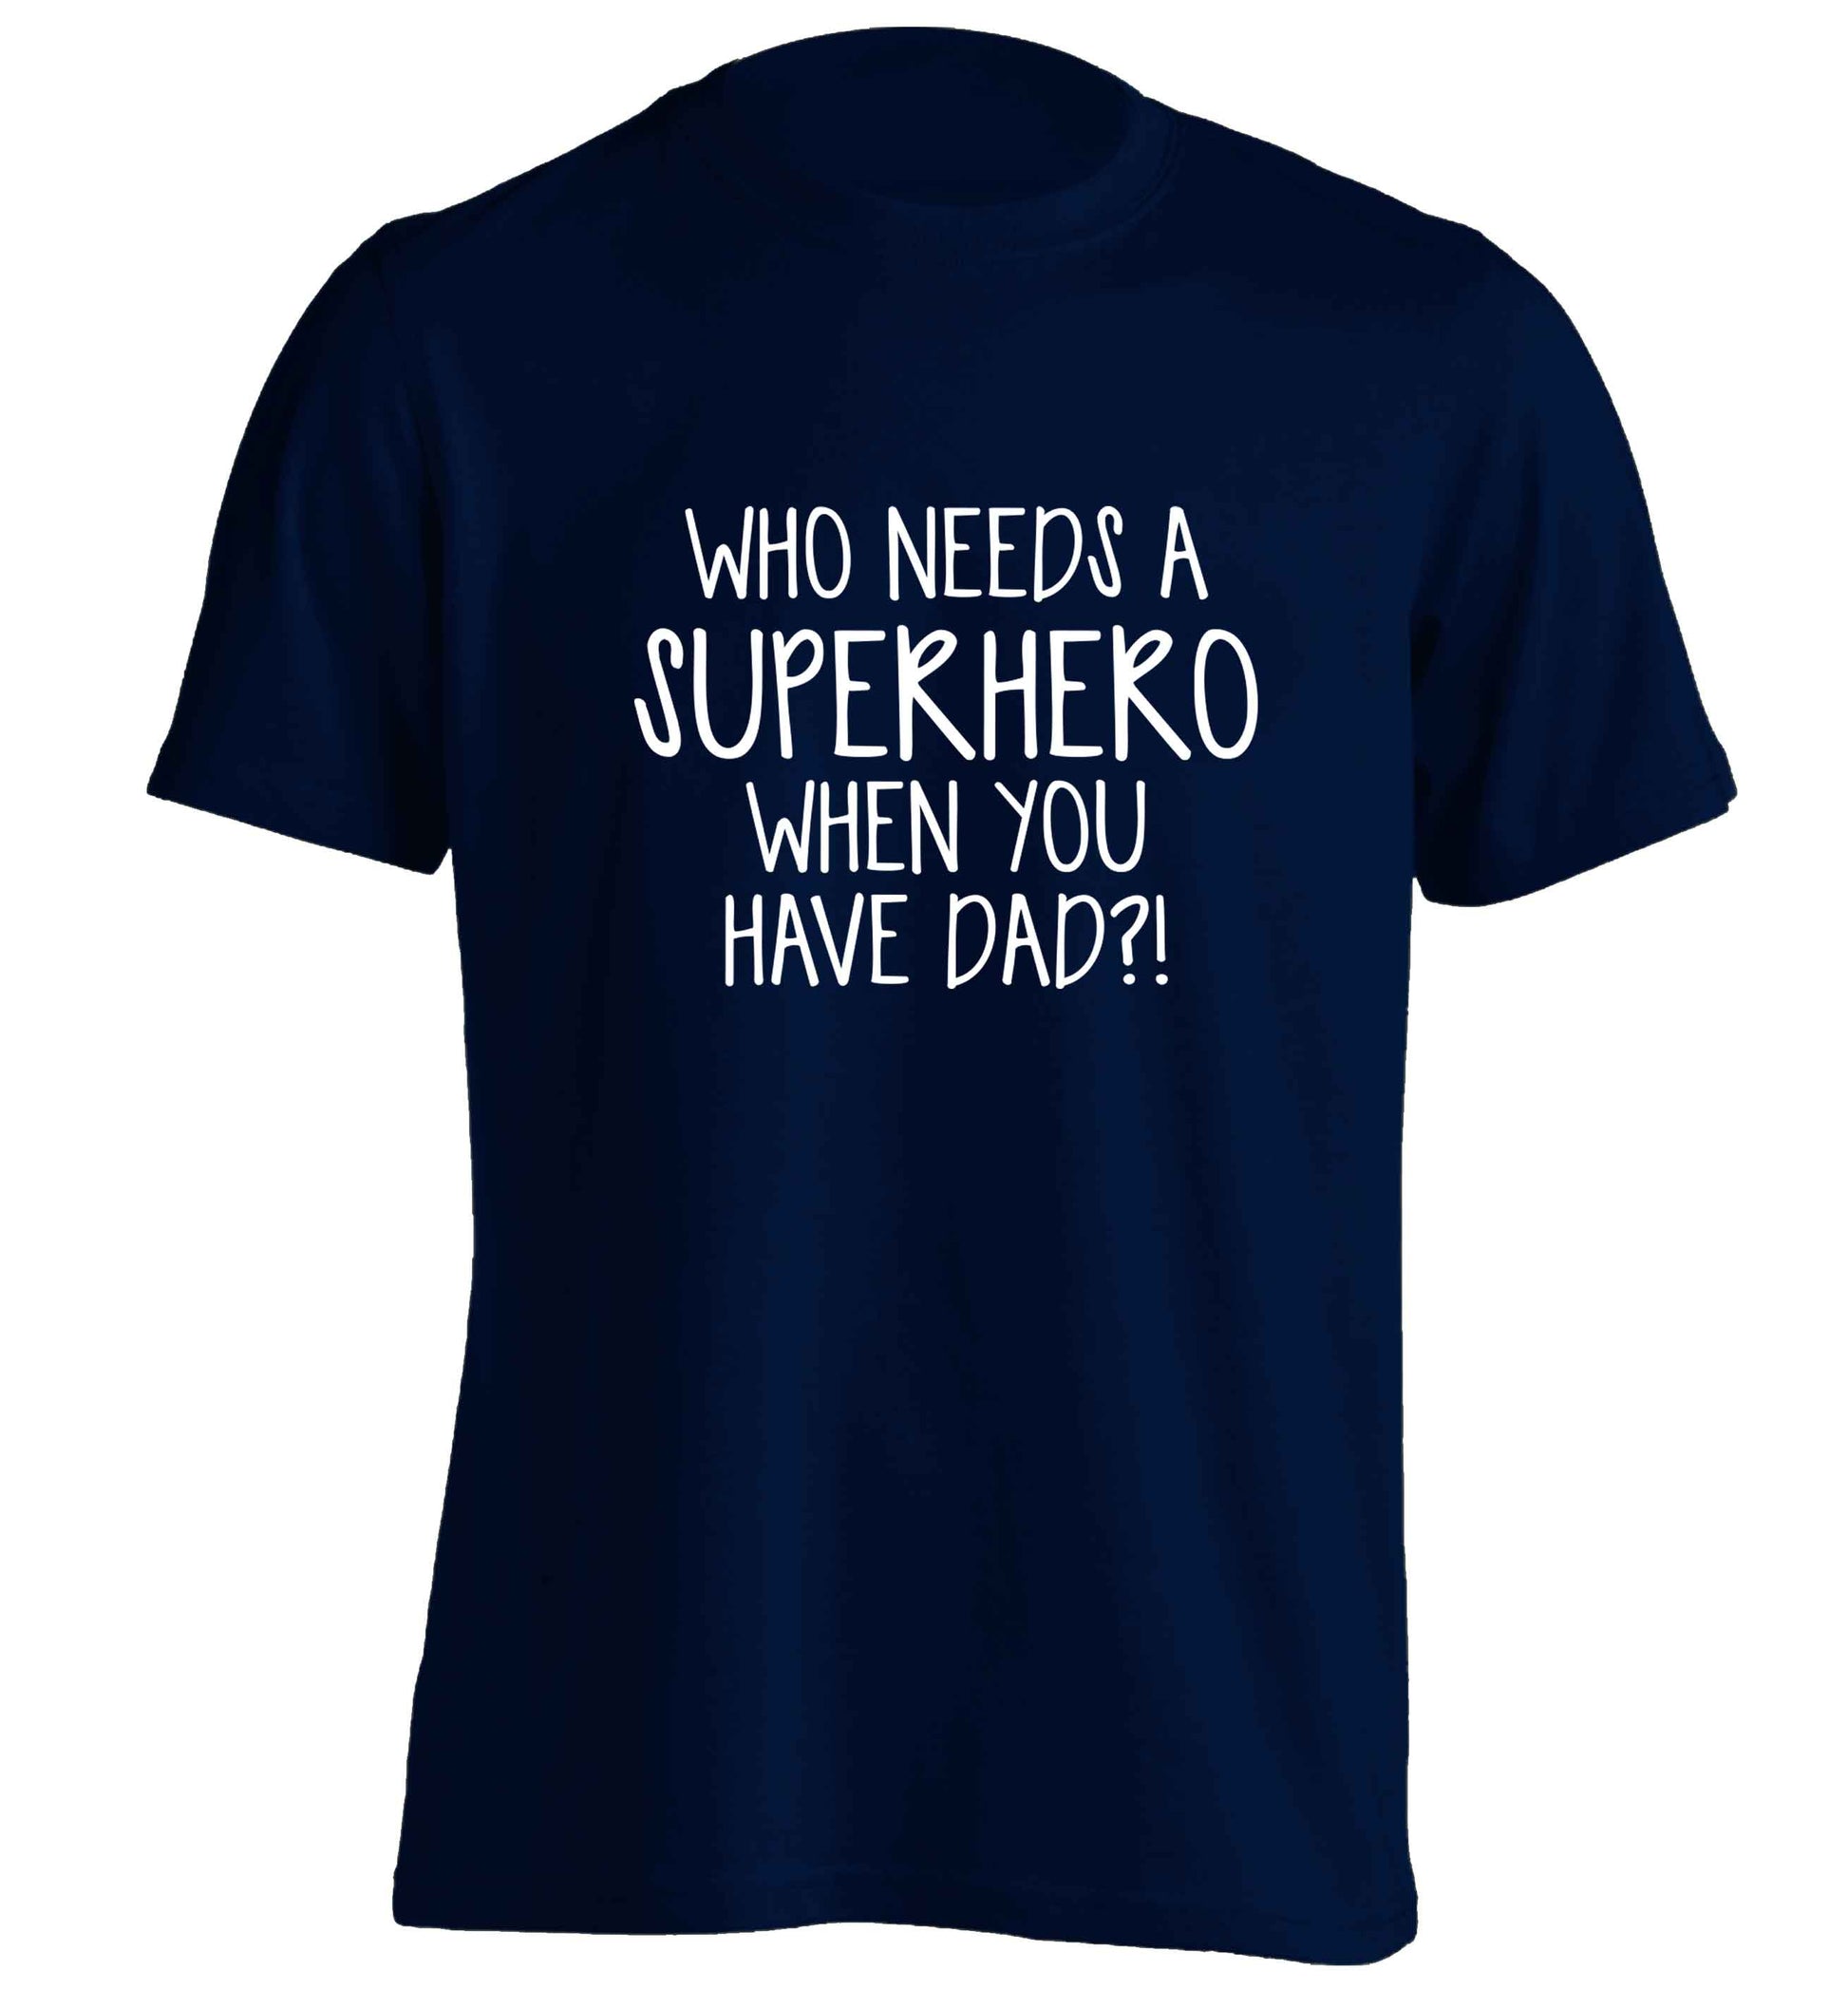 Who needs a superhero when you have dad! adults unisex navy Tshirt 2XL